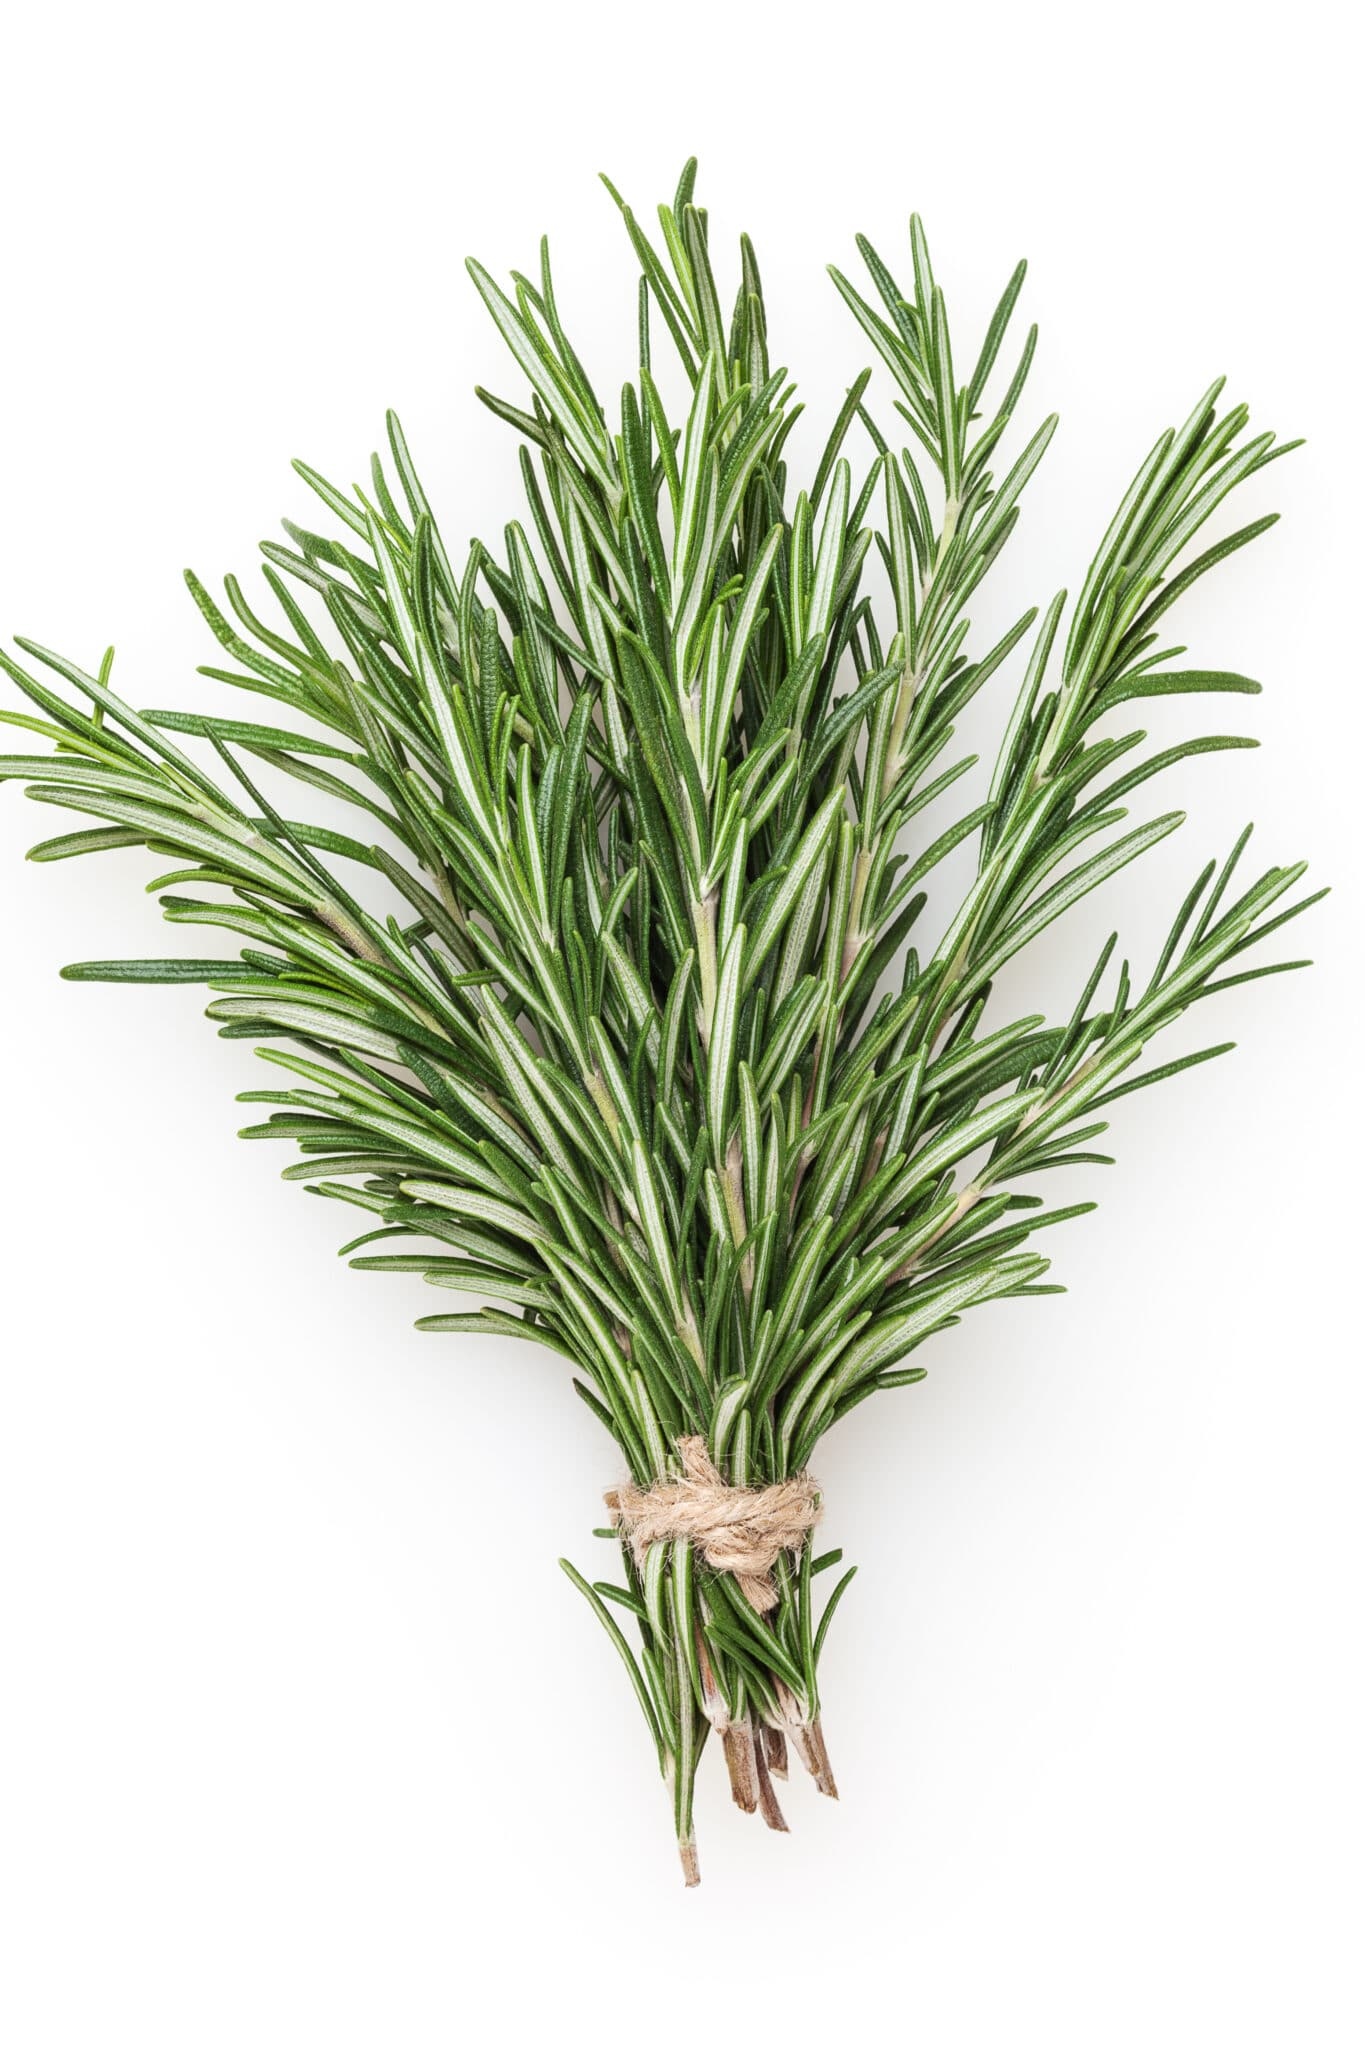 HD wallpaper, 1370X2050 Hd Phone, Harvest And Use, How To Grow, Rosemary, Mobile Hd Rosemary Herb Background Image, Rosemary Plants